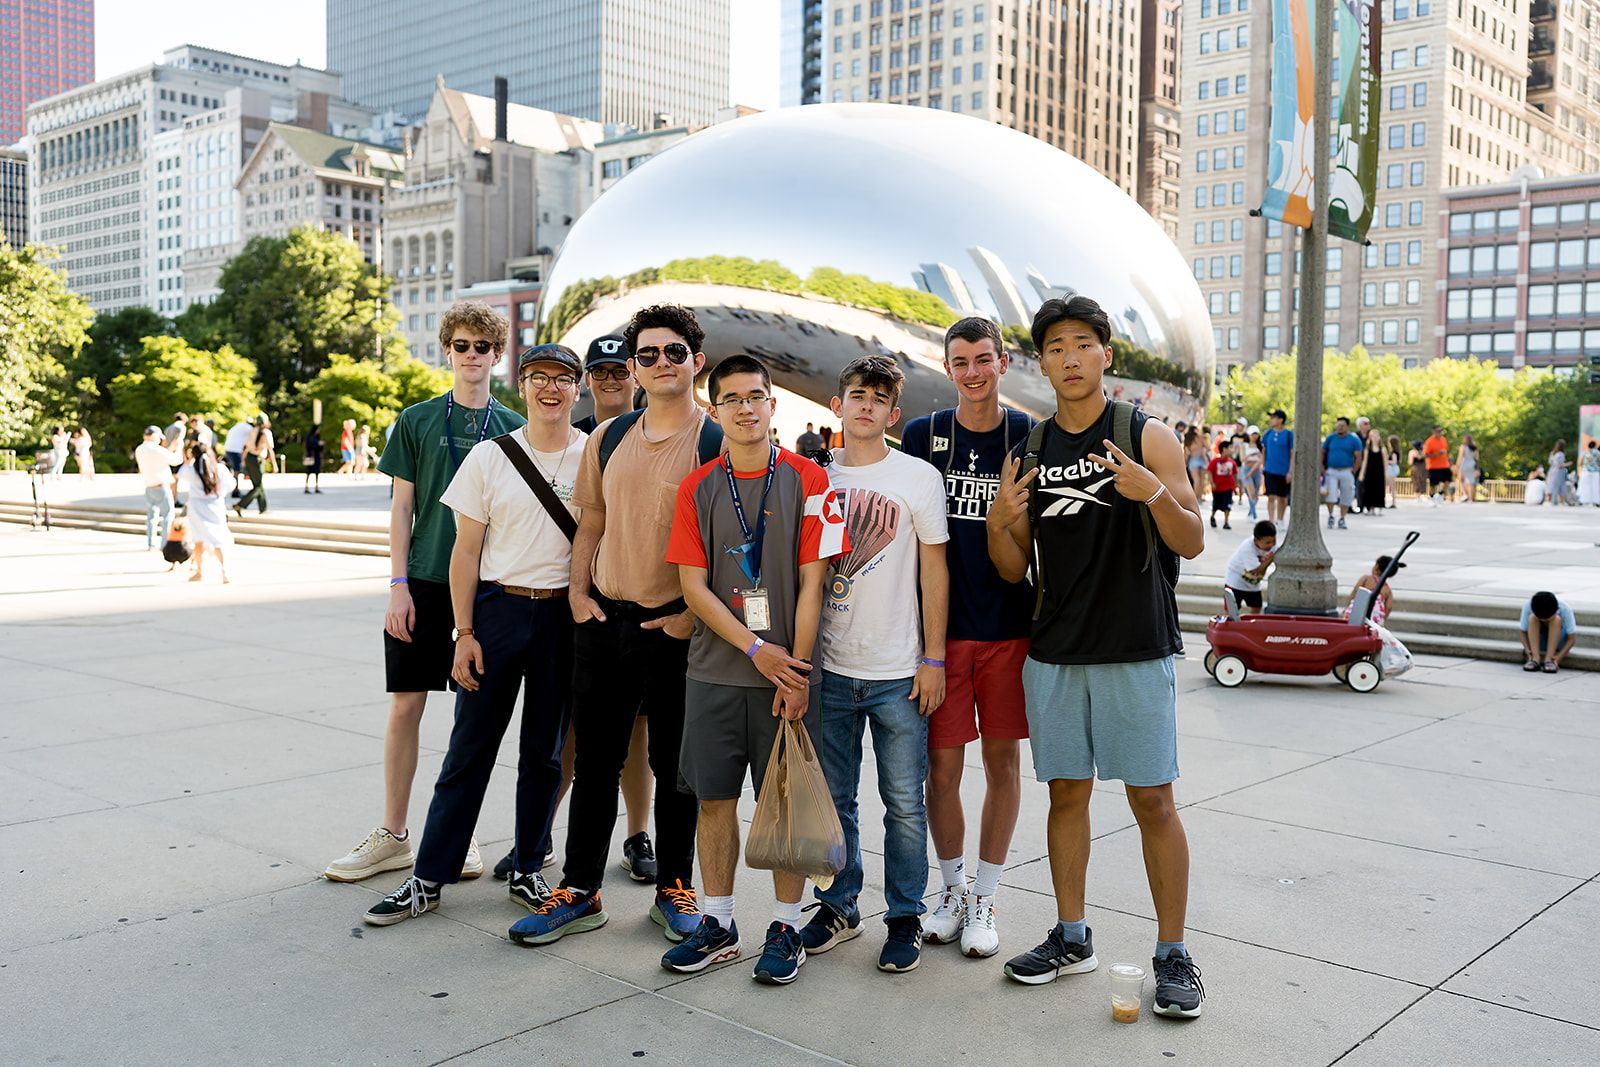 Wheaton College Summer Institute students at Cloudgate (aka The Bean) in Chicago